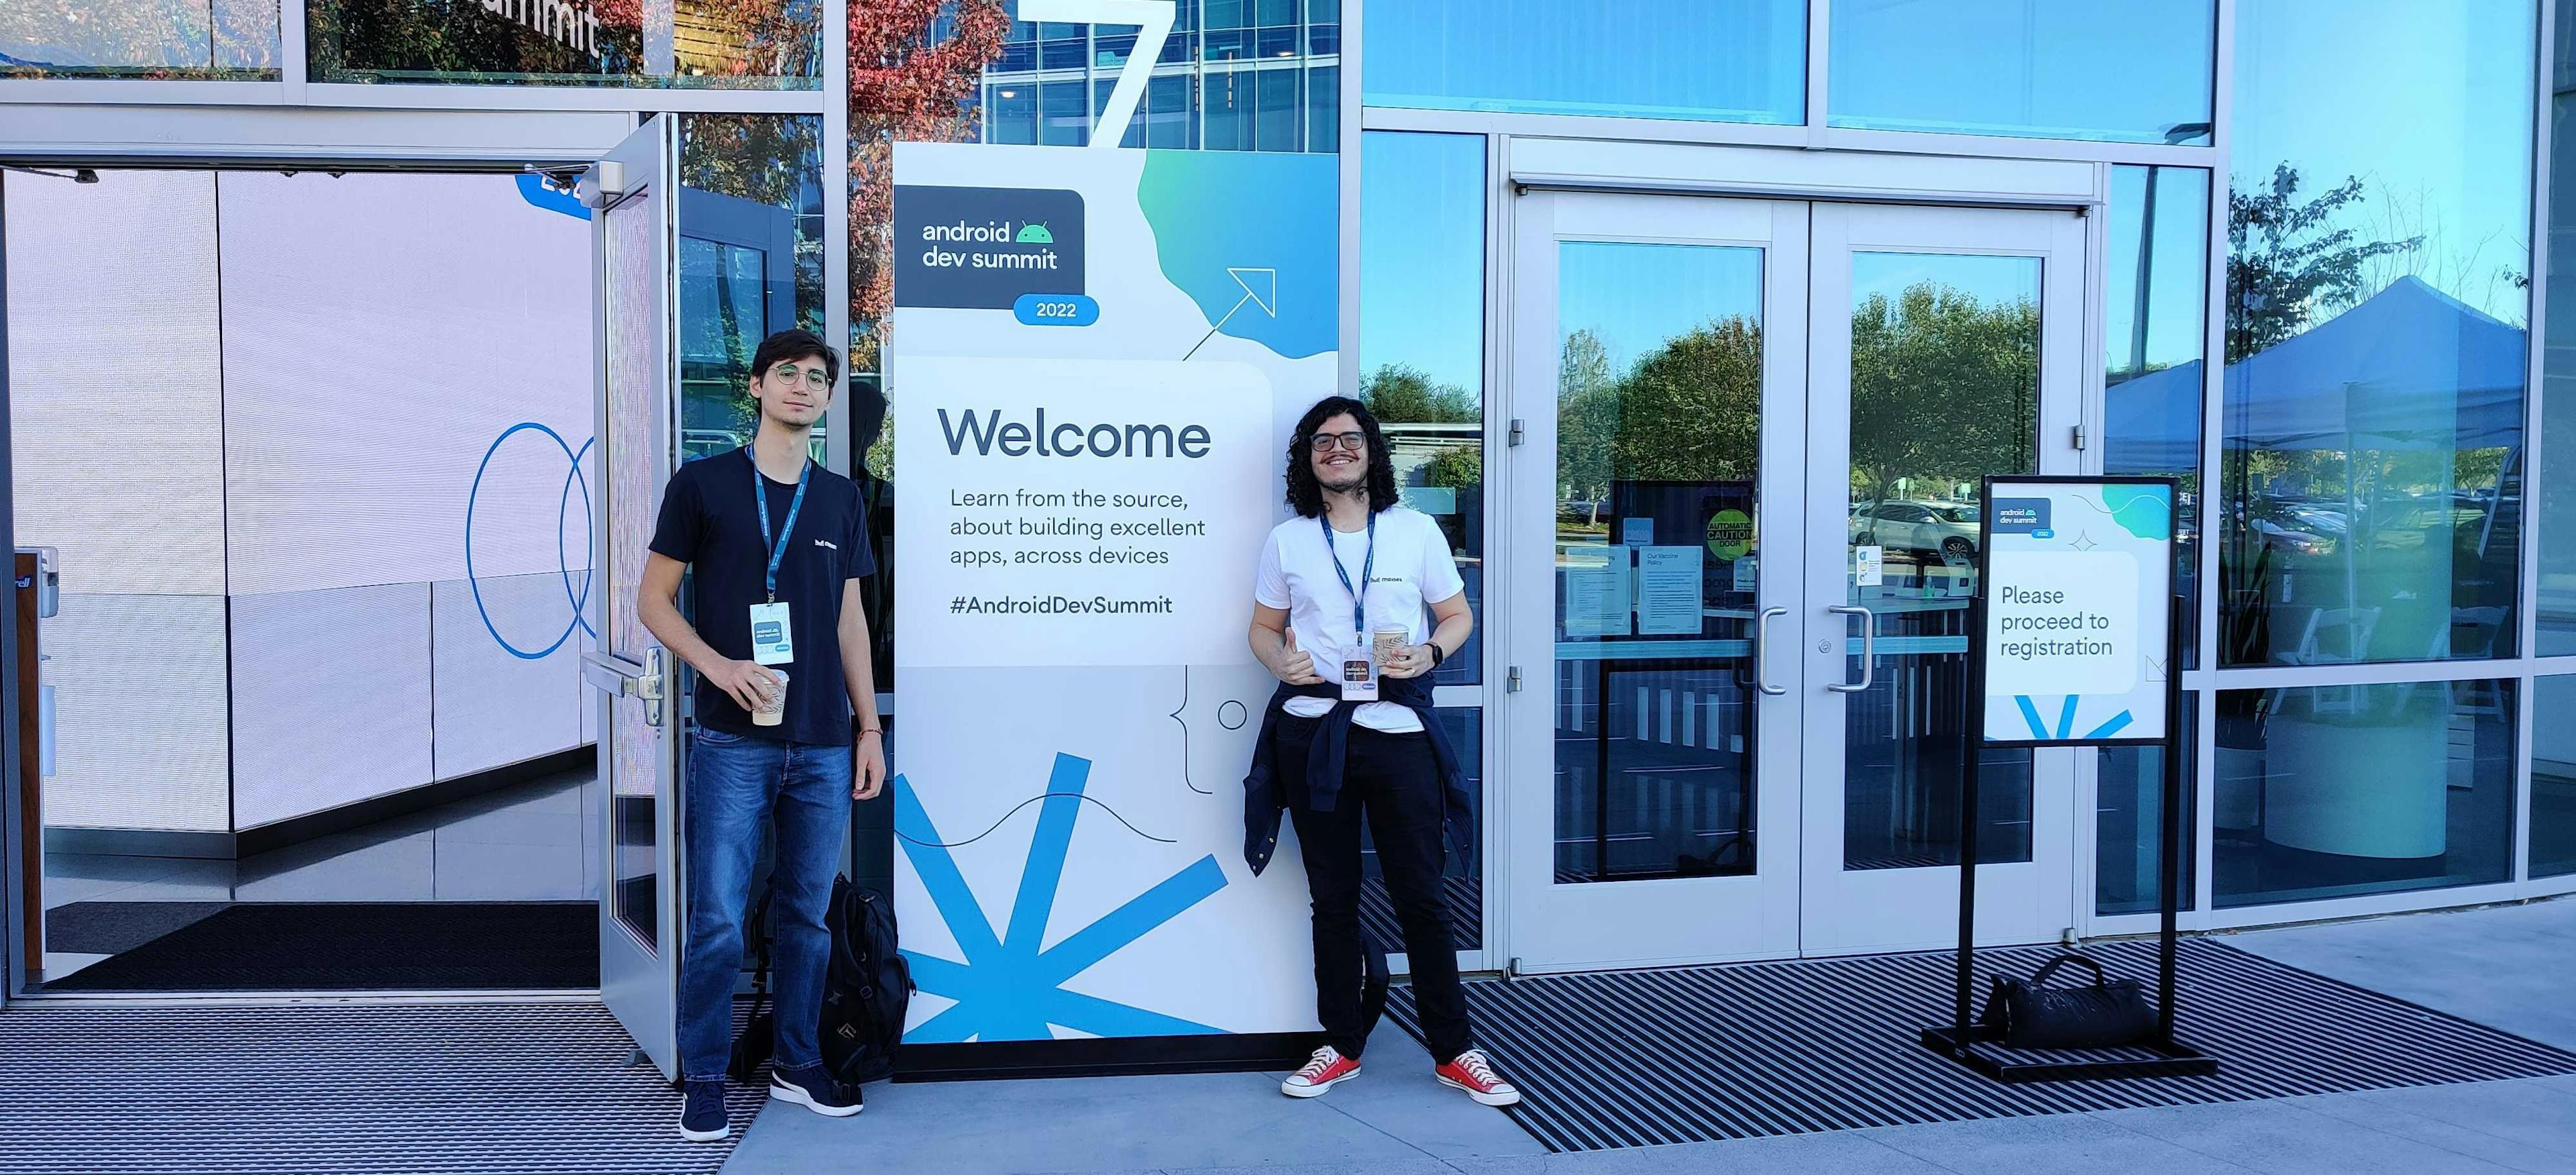 Moises developers at the Android Development Summit 2022 event